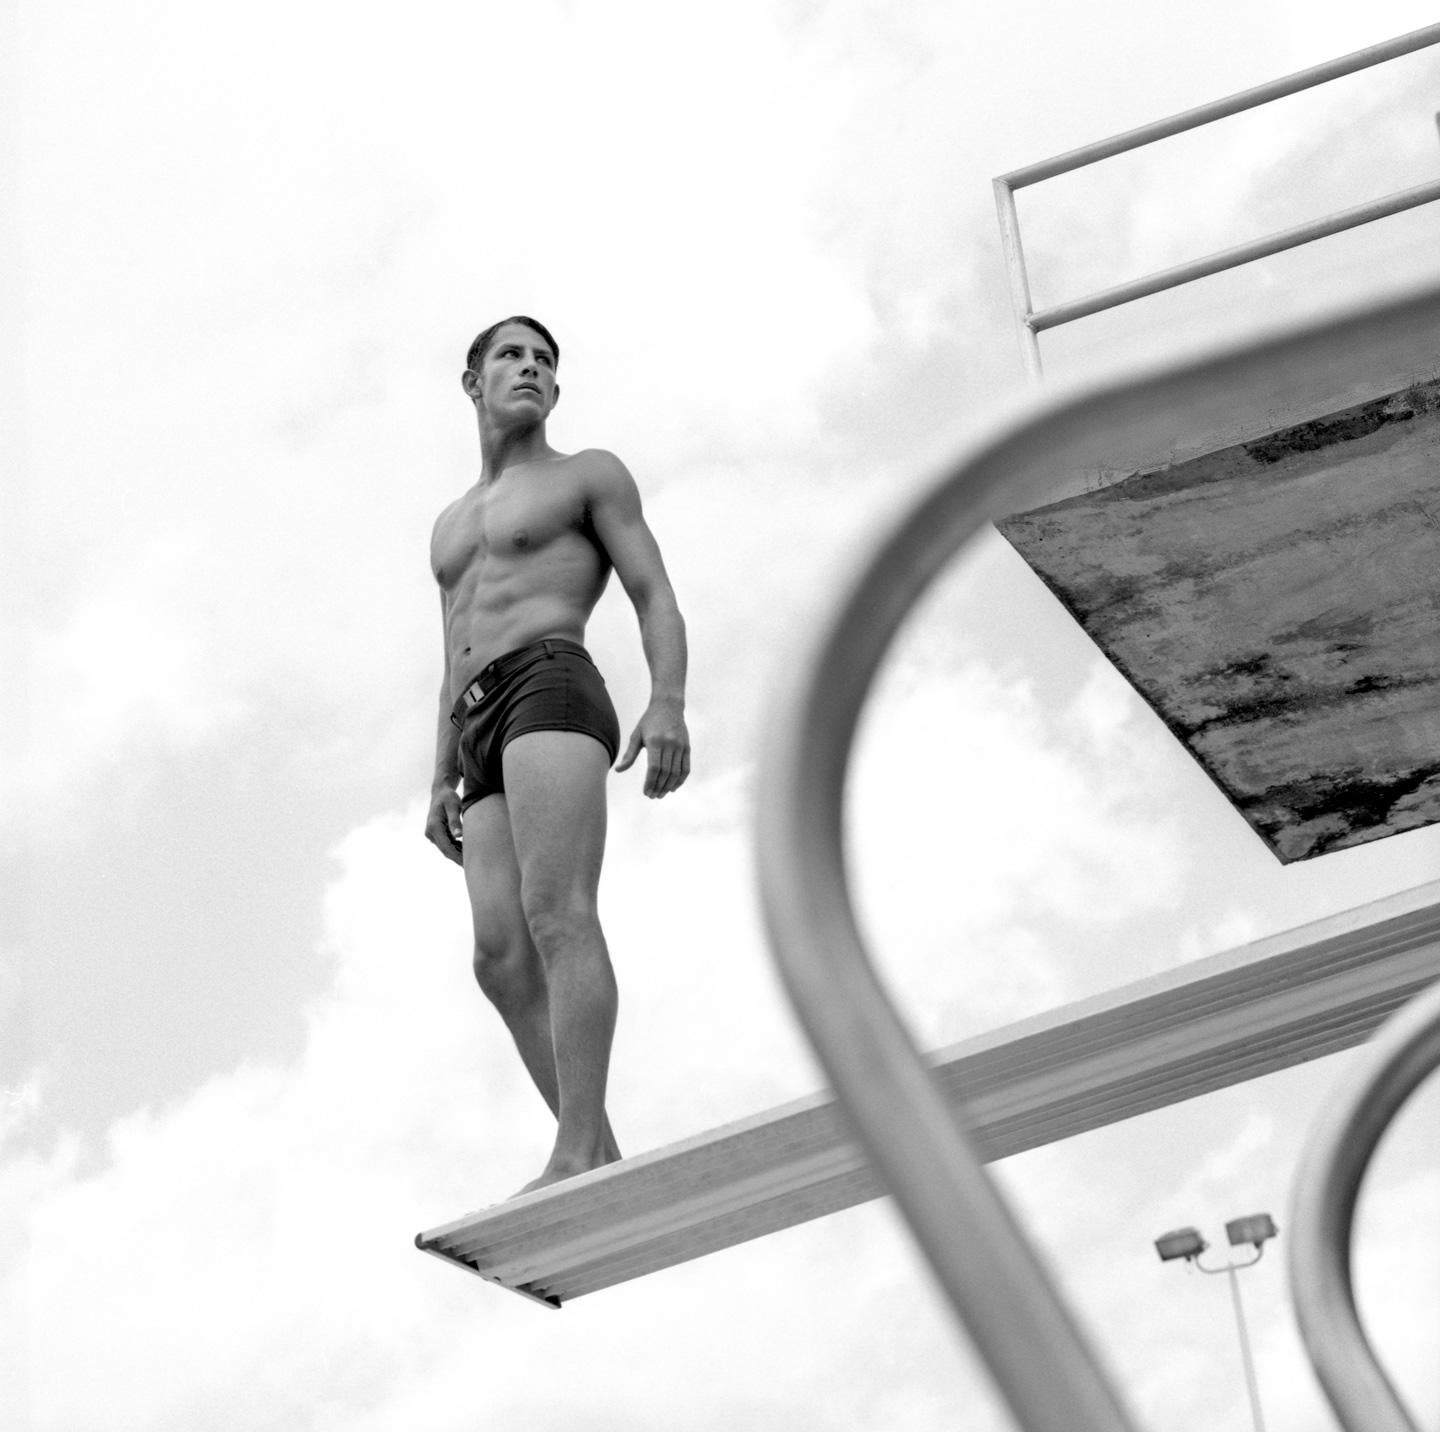 Poby Portrait Photograph - Man on Diving Board